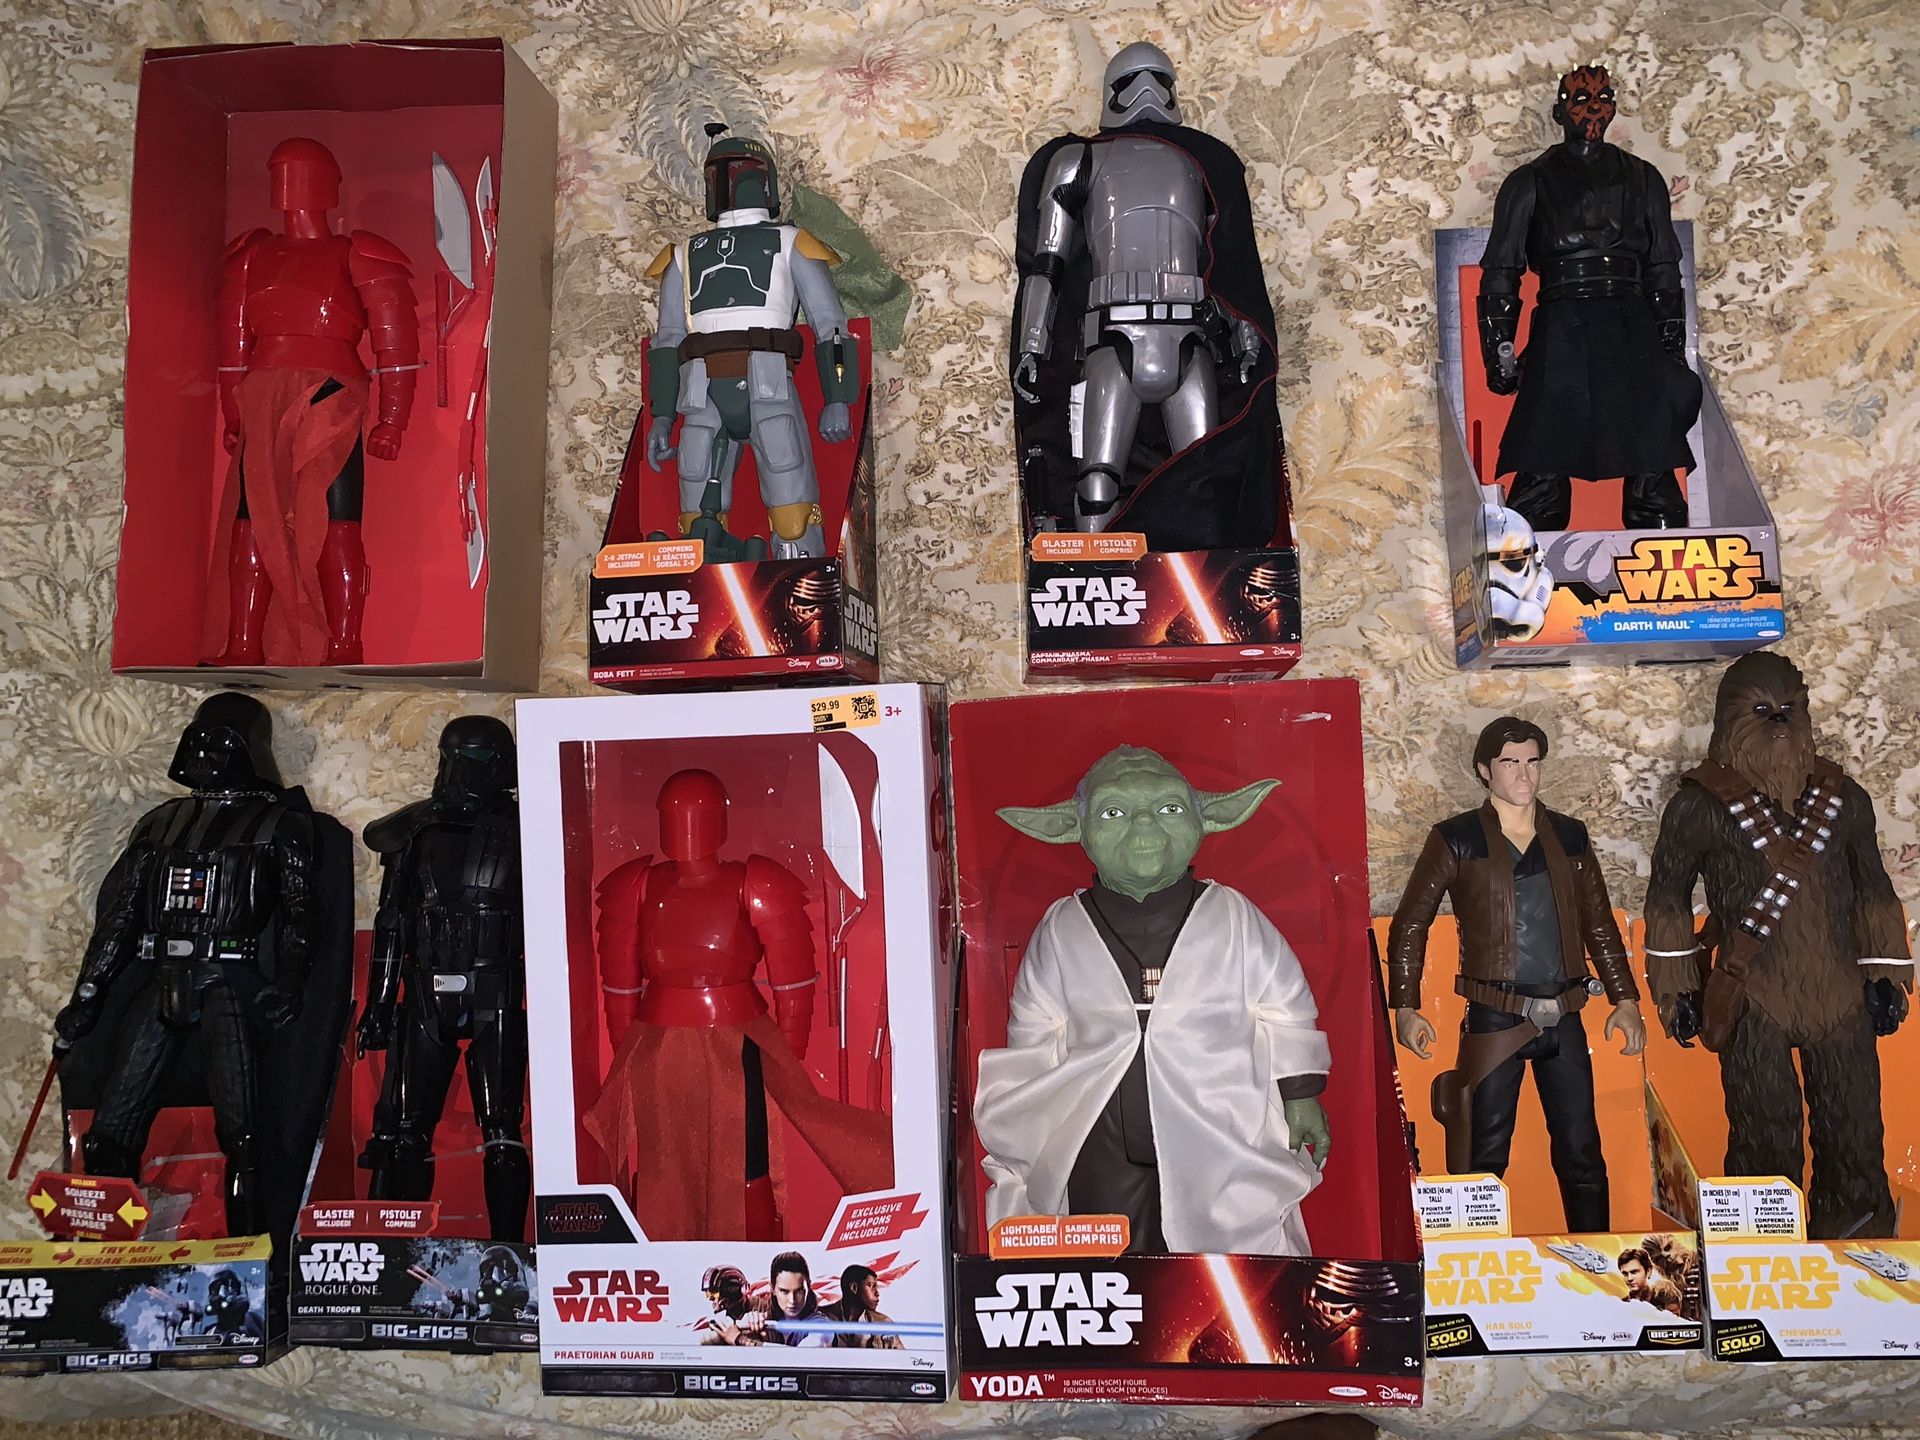 18” Tall Star Wars action figure statues big-figs jakks pacific collectibles 1/4 Scale